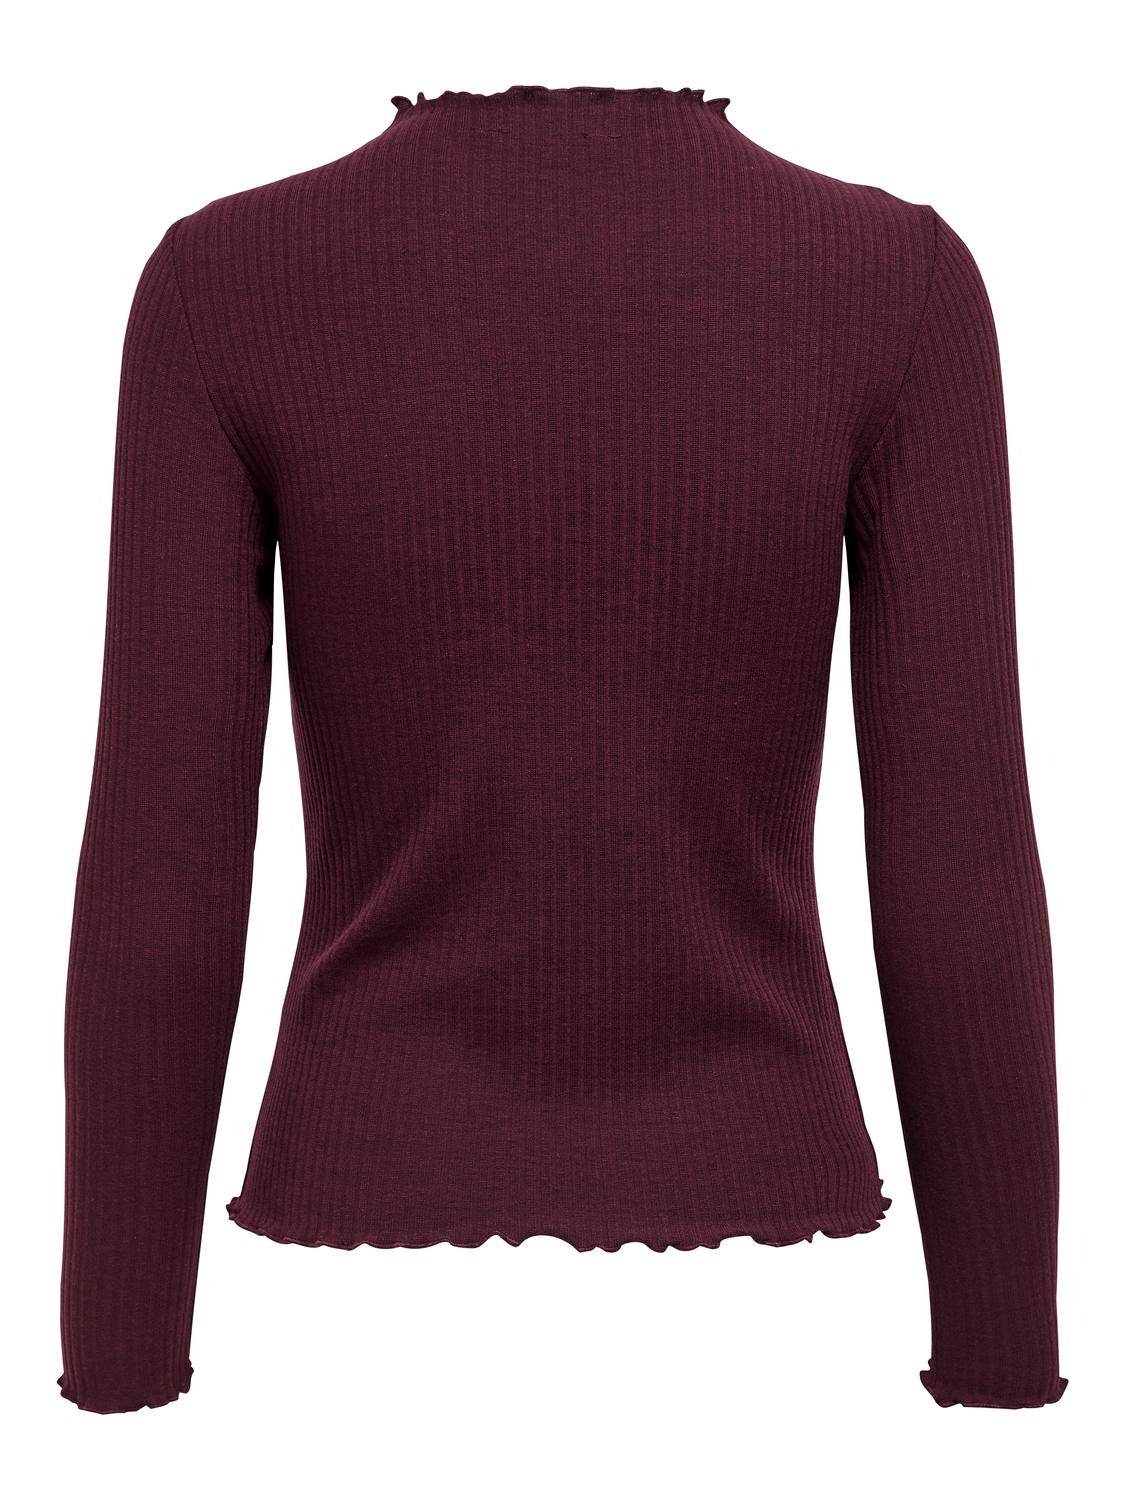 ONLY High neck Long Sleeved Top -Madder Brown - 15180040